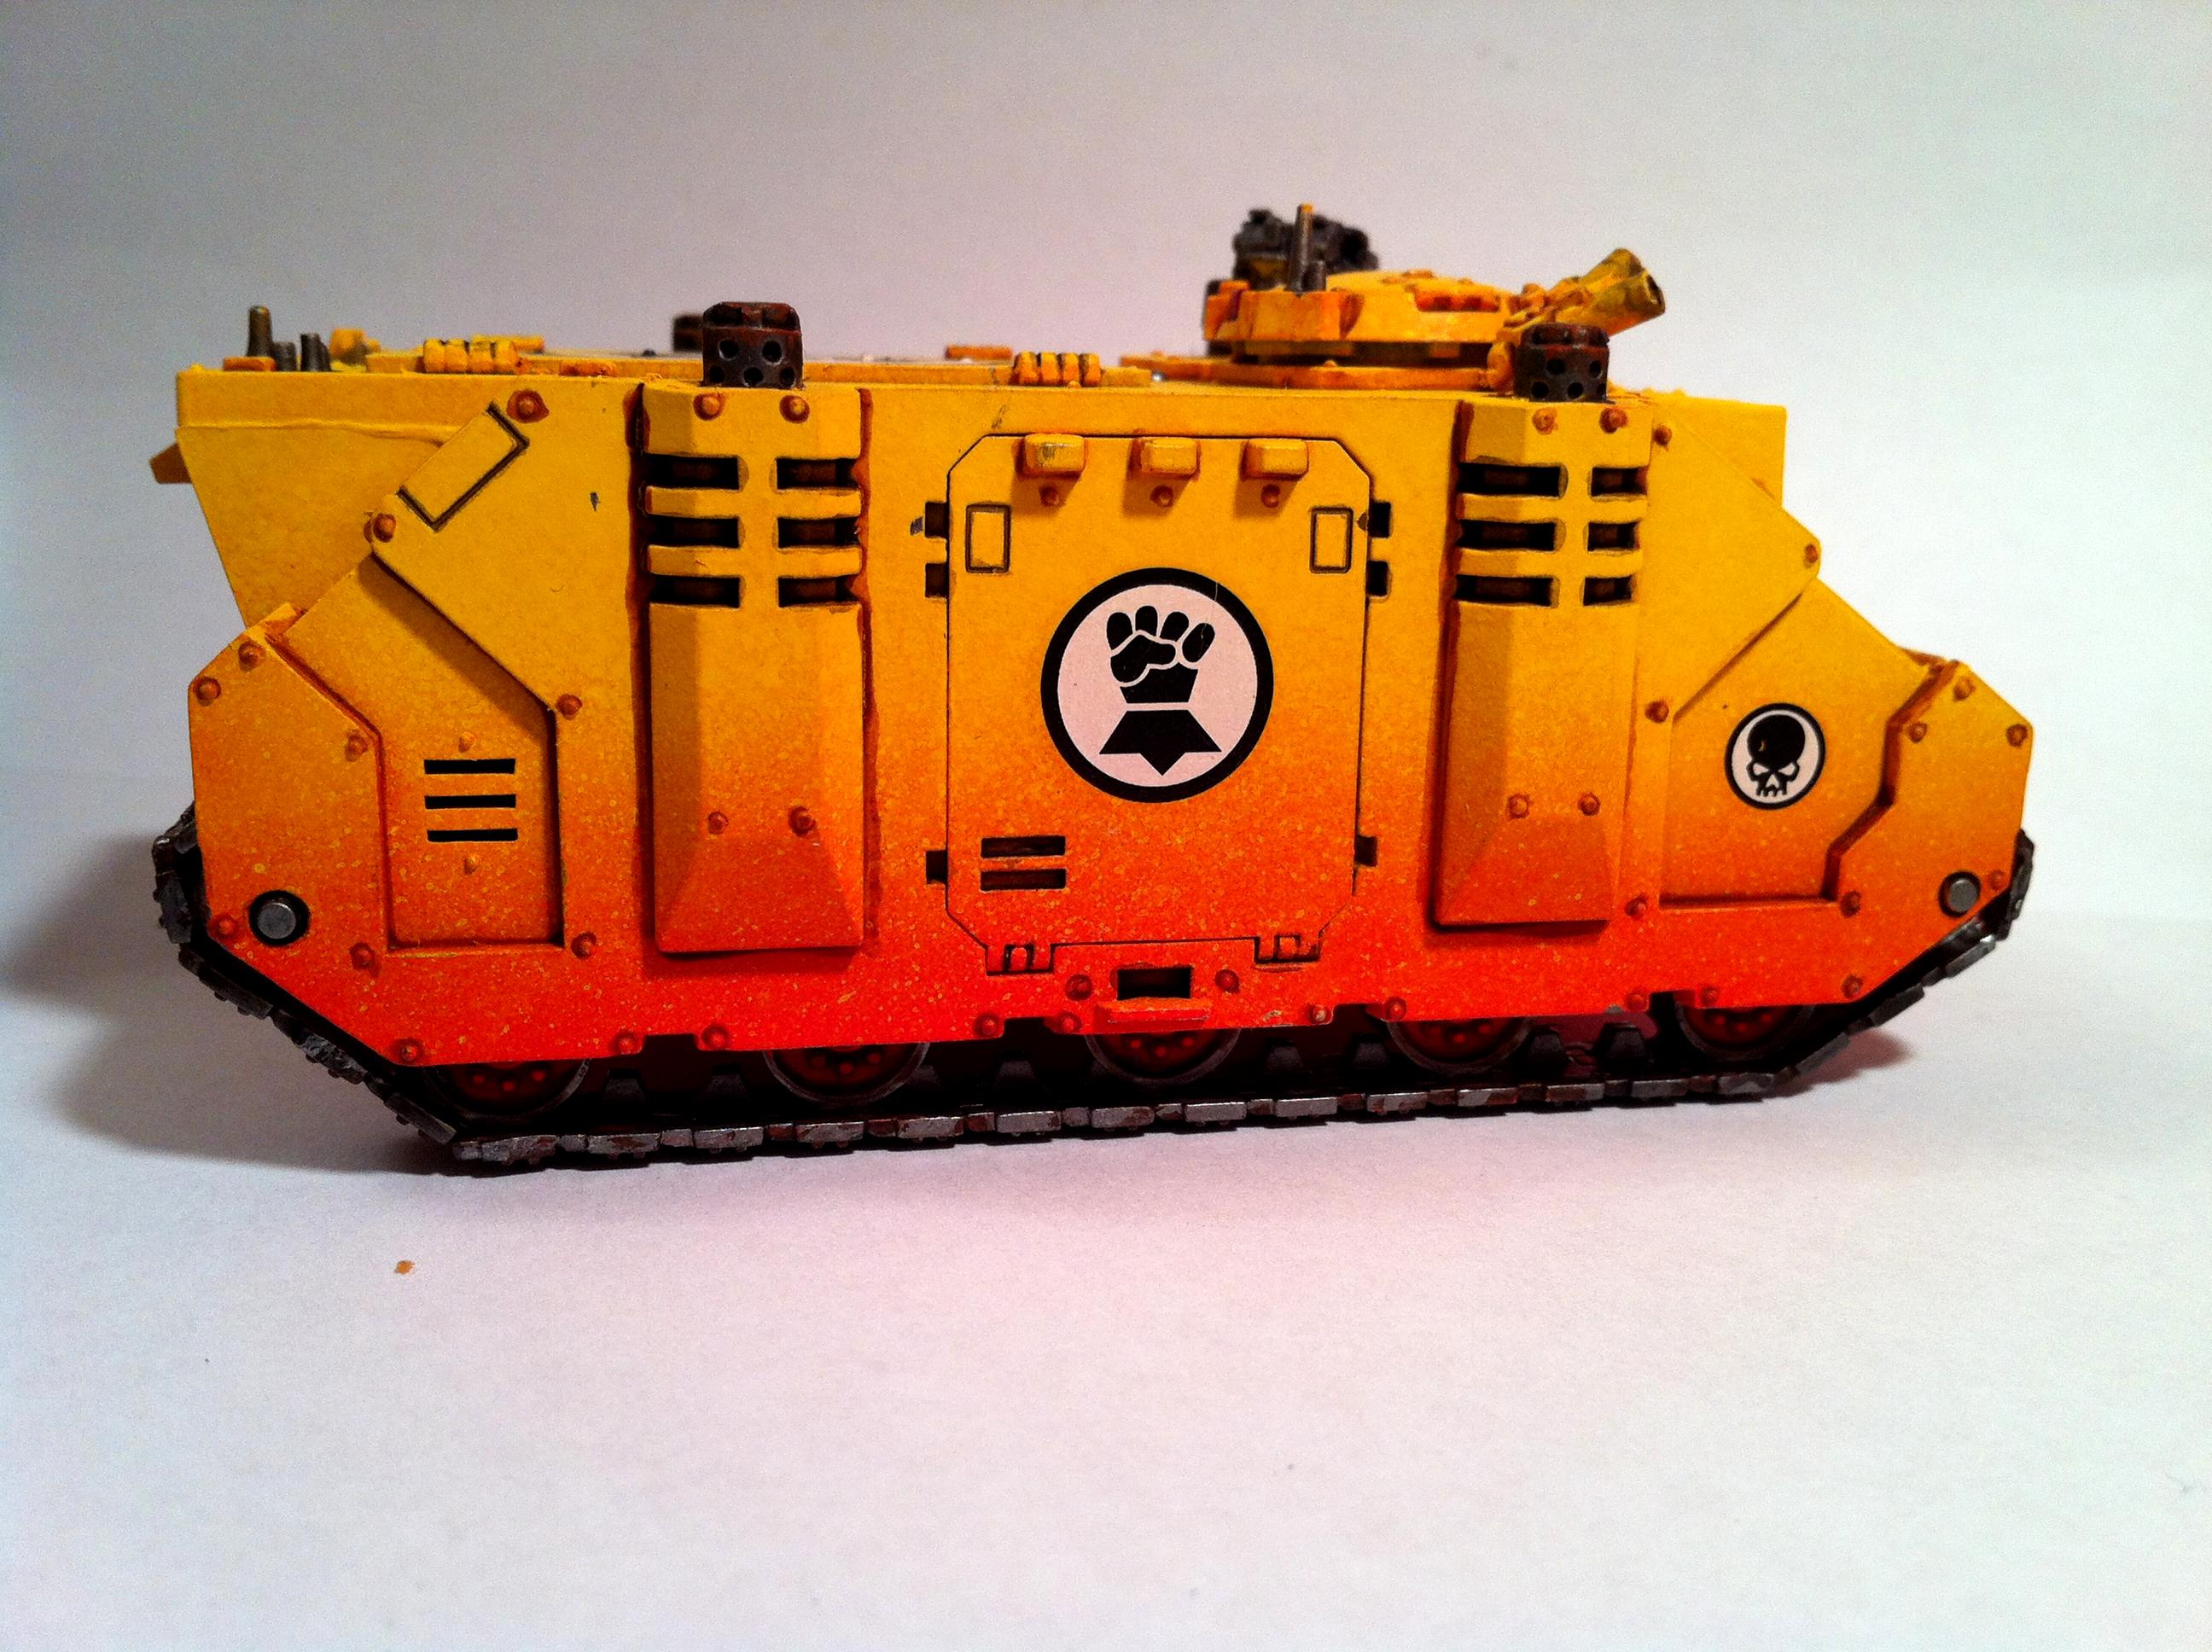 Fists, Imperial, Imperial Fists Rhino, Rhino